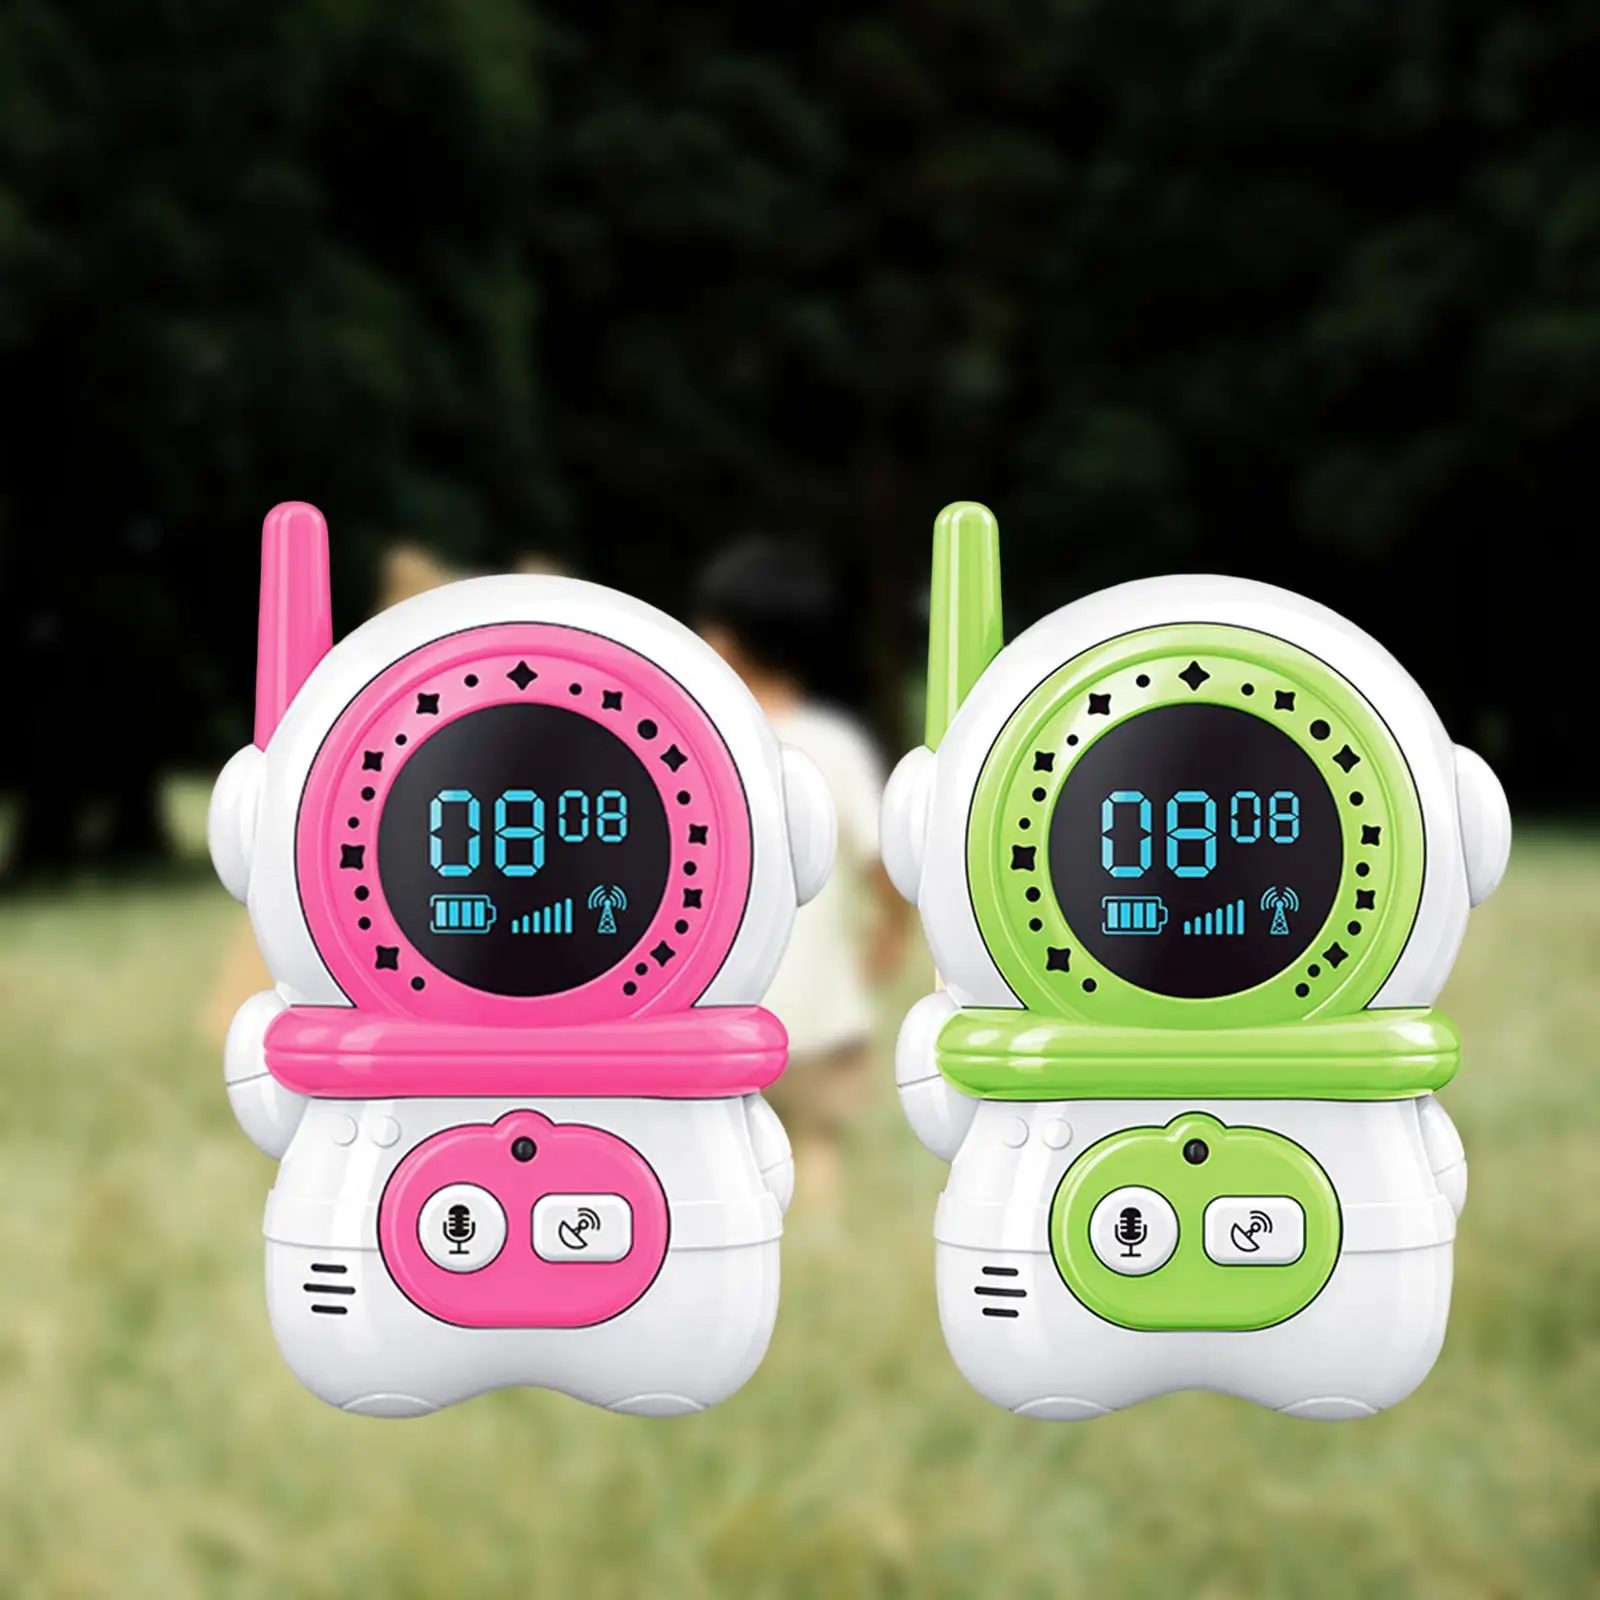 2 Pieces Walkie Talkie Children Electronic Portable Walkie Talkie Toy for 3-12 Years Old Teens Hiking Travel Family Games